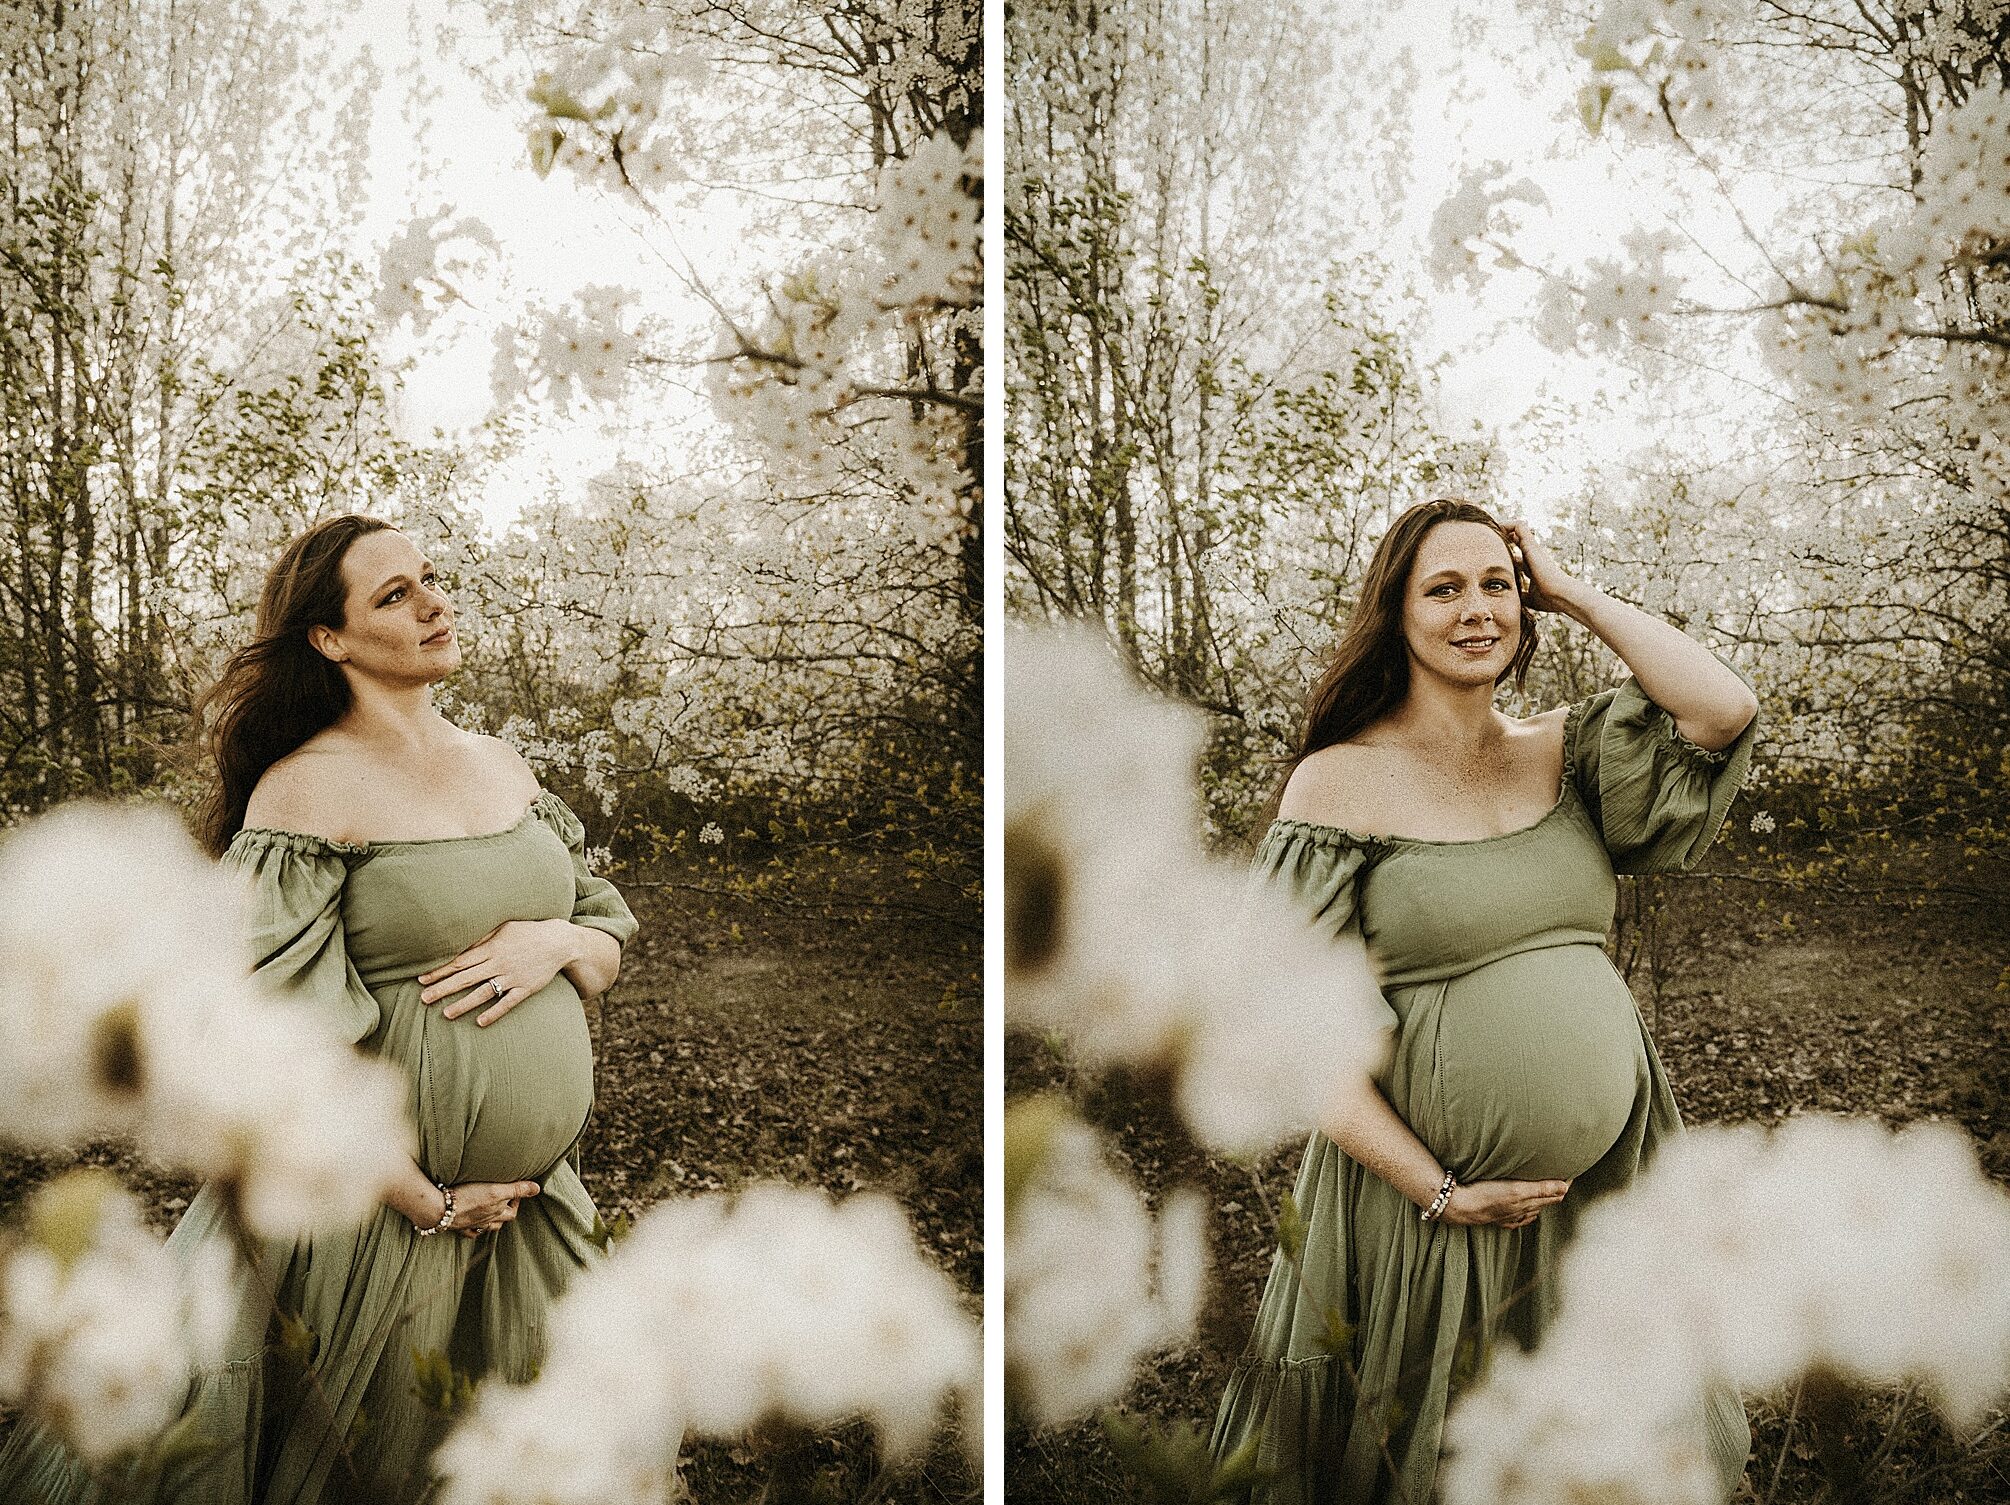 Expecting mother between blooming trees in O'fallon Missouri wearing We are Reclamation sage green gown fine art vintage photography